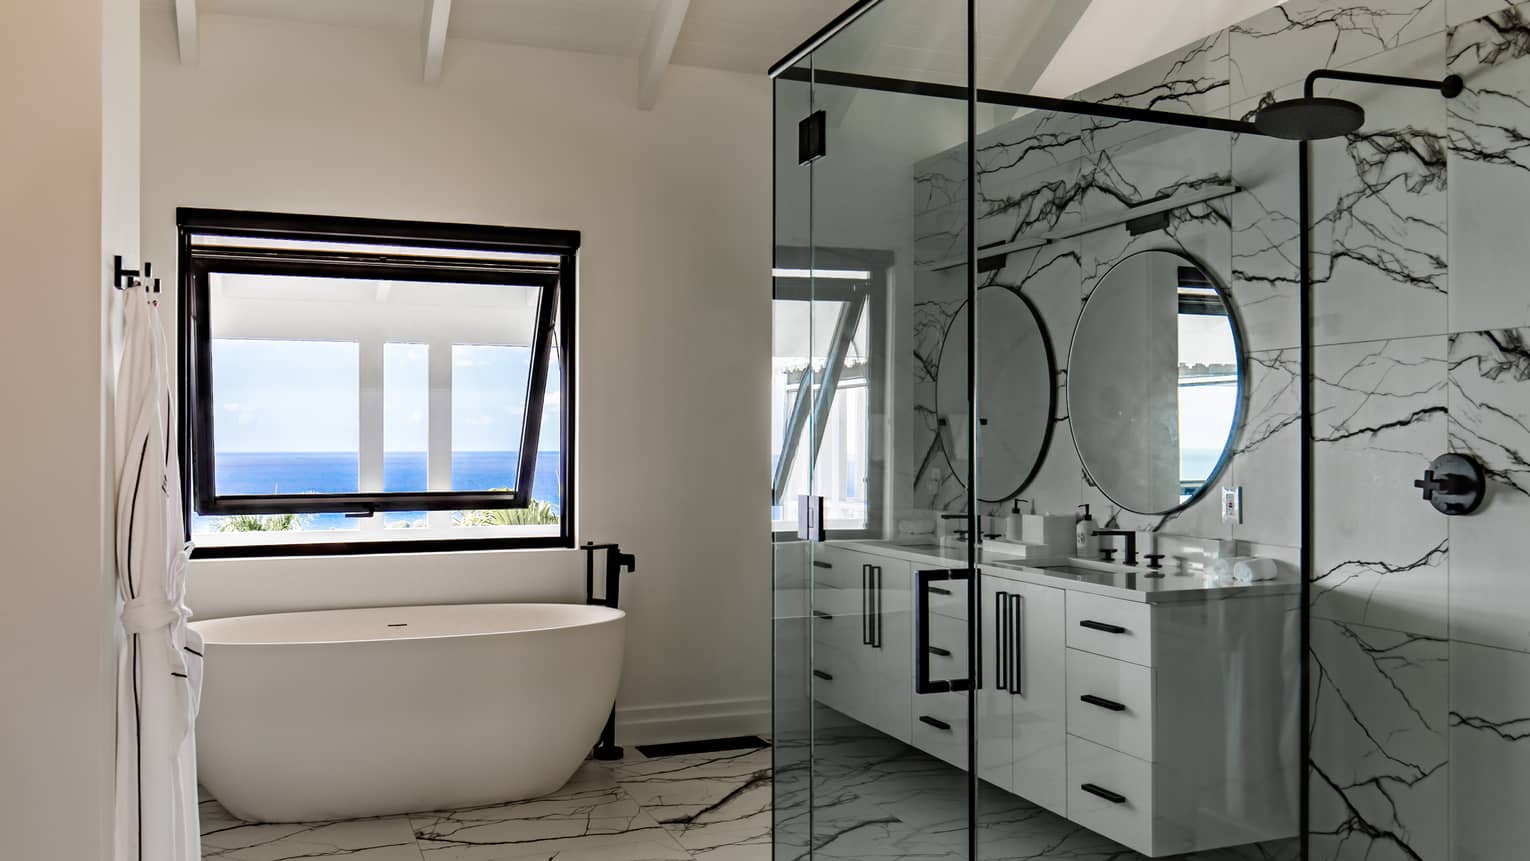 Marble bathroom with large glass shower, oval tub, double vanity and window with sea view